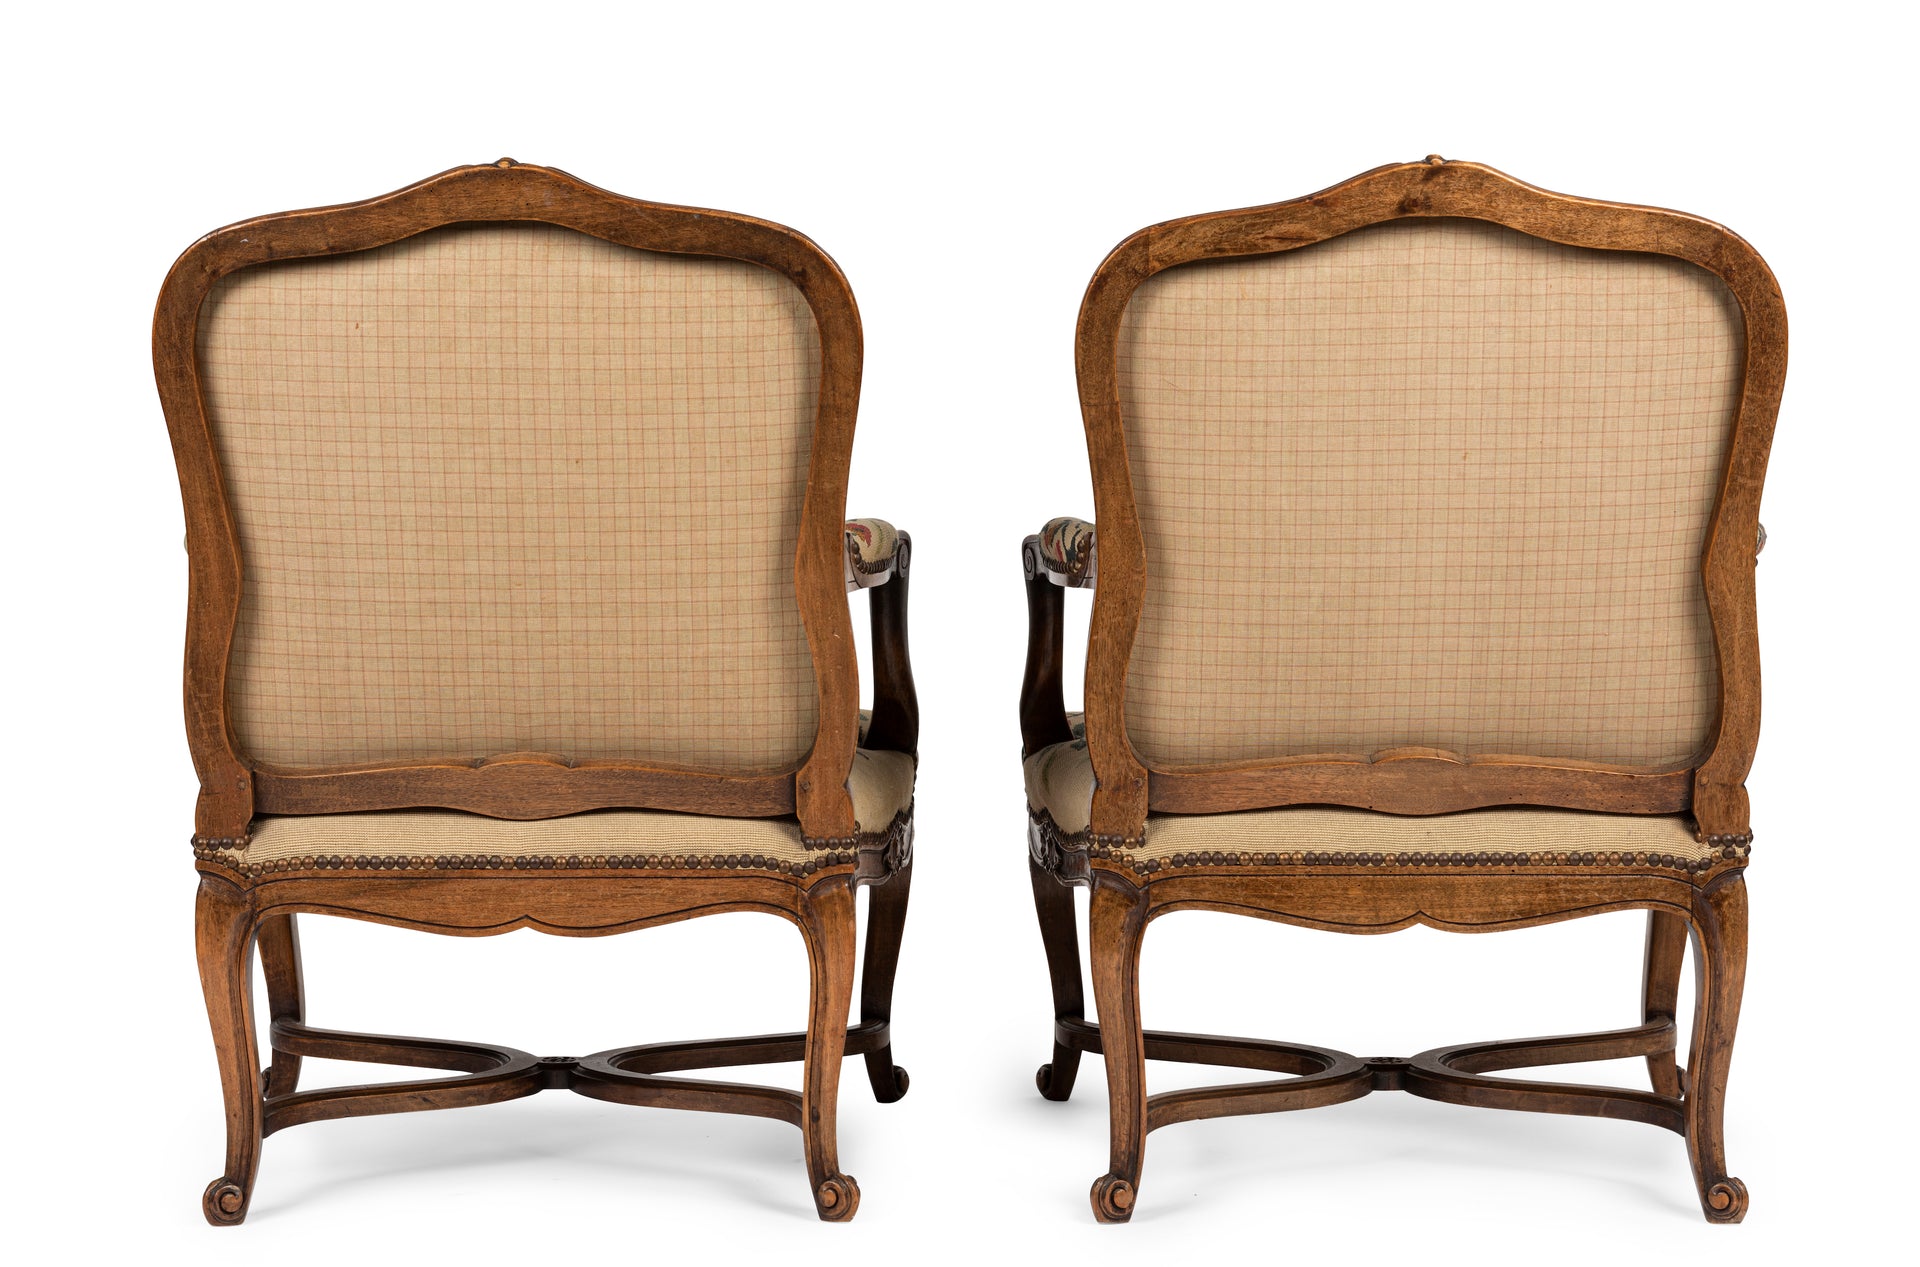 SOLD A beautiful pair of Louis XVI style fauteuils with original needlework upholstery, French 19th Century